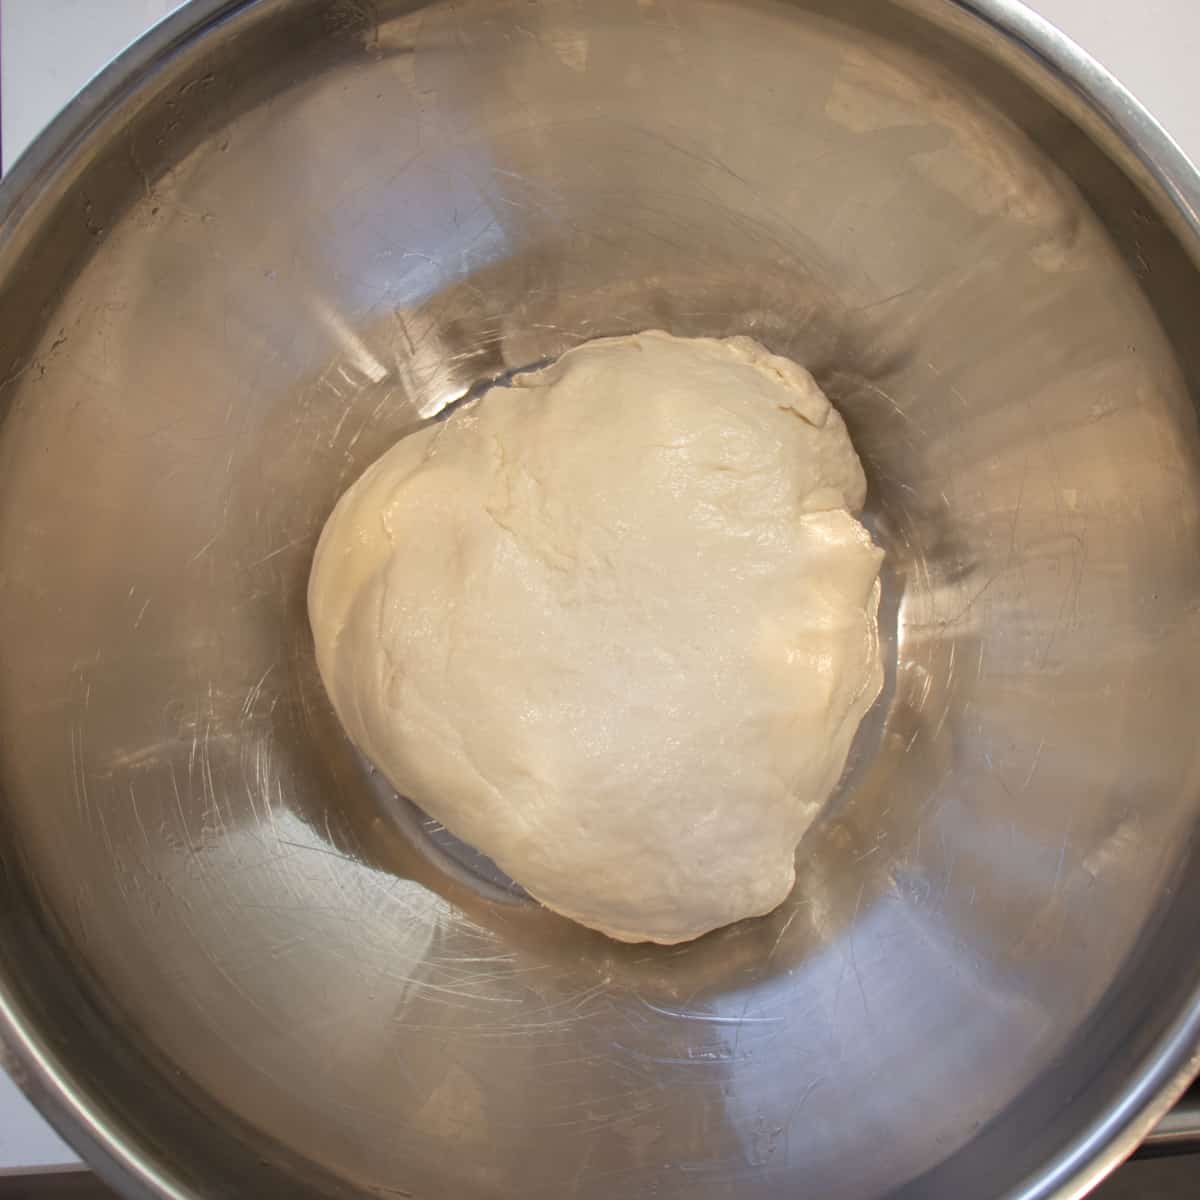 Bread dough in a large metal bowl before rising.